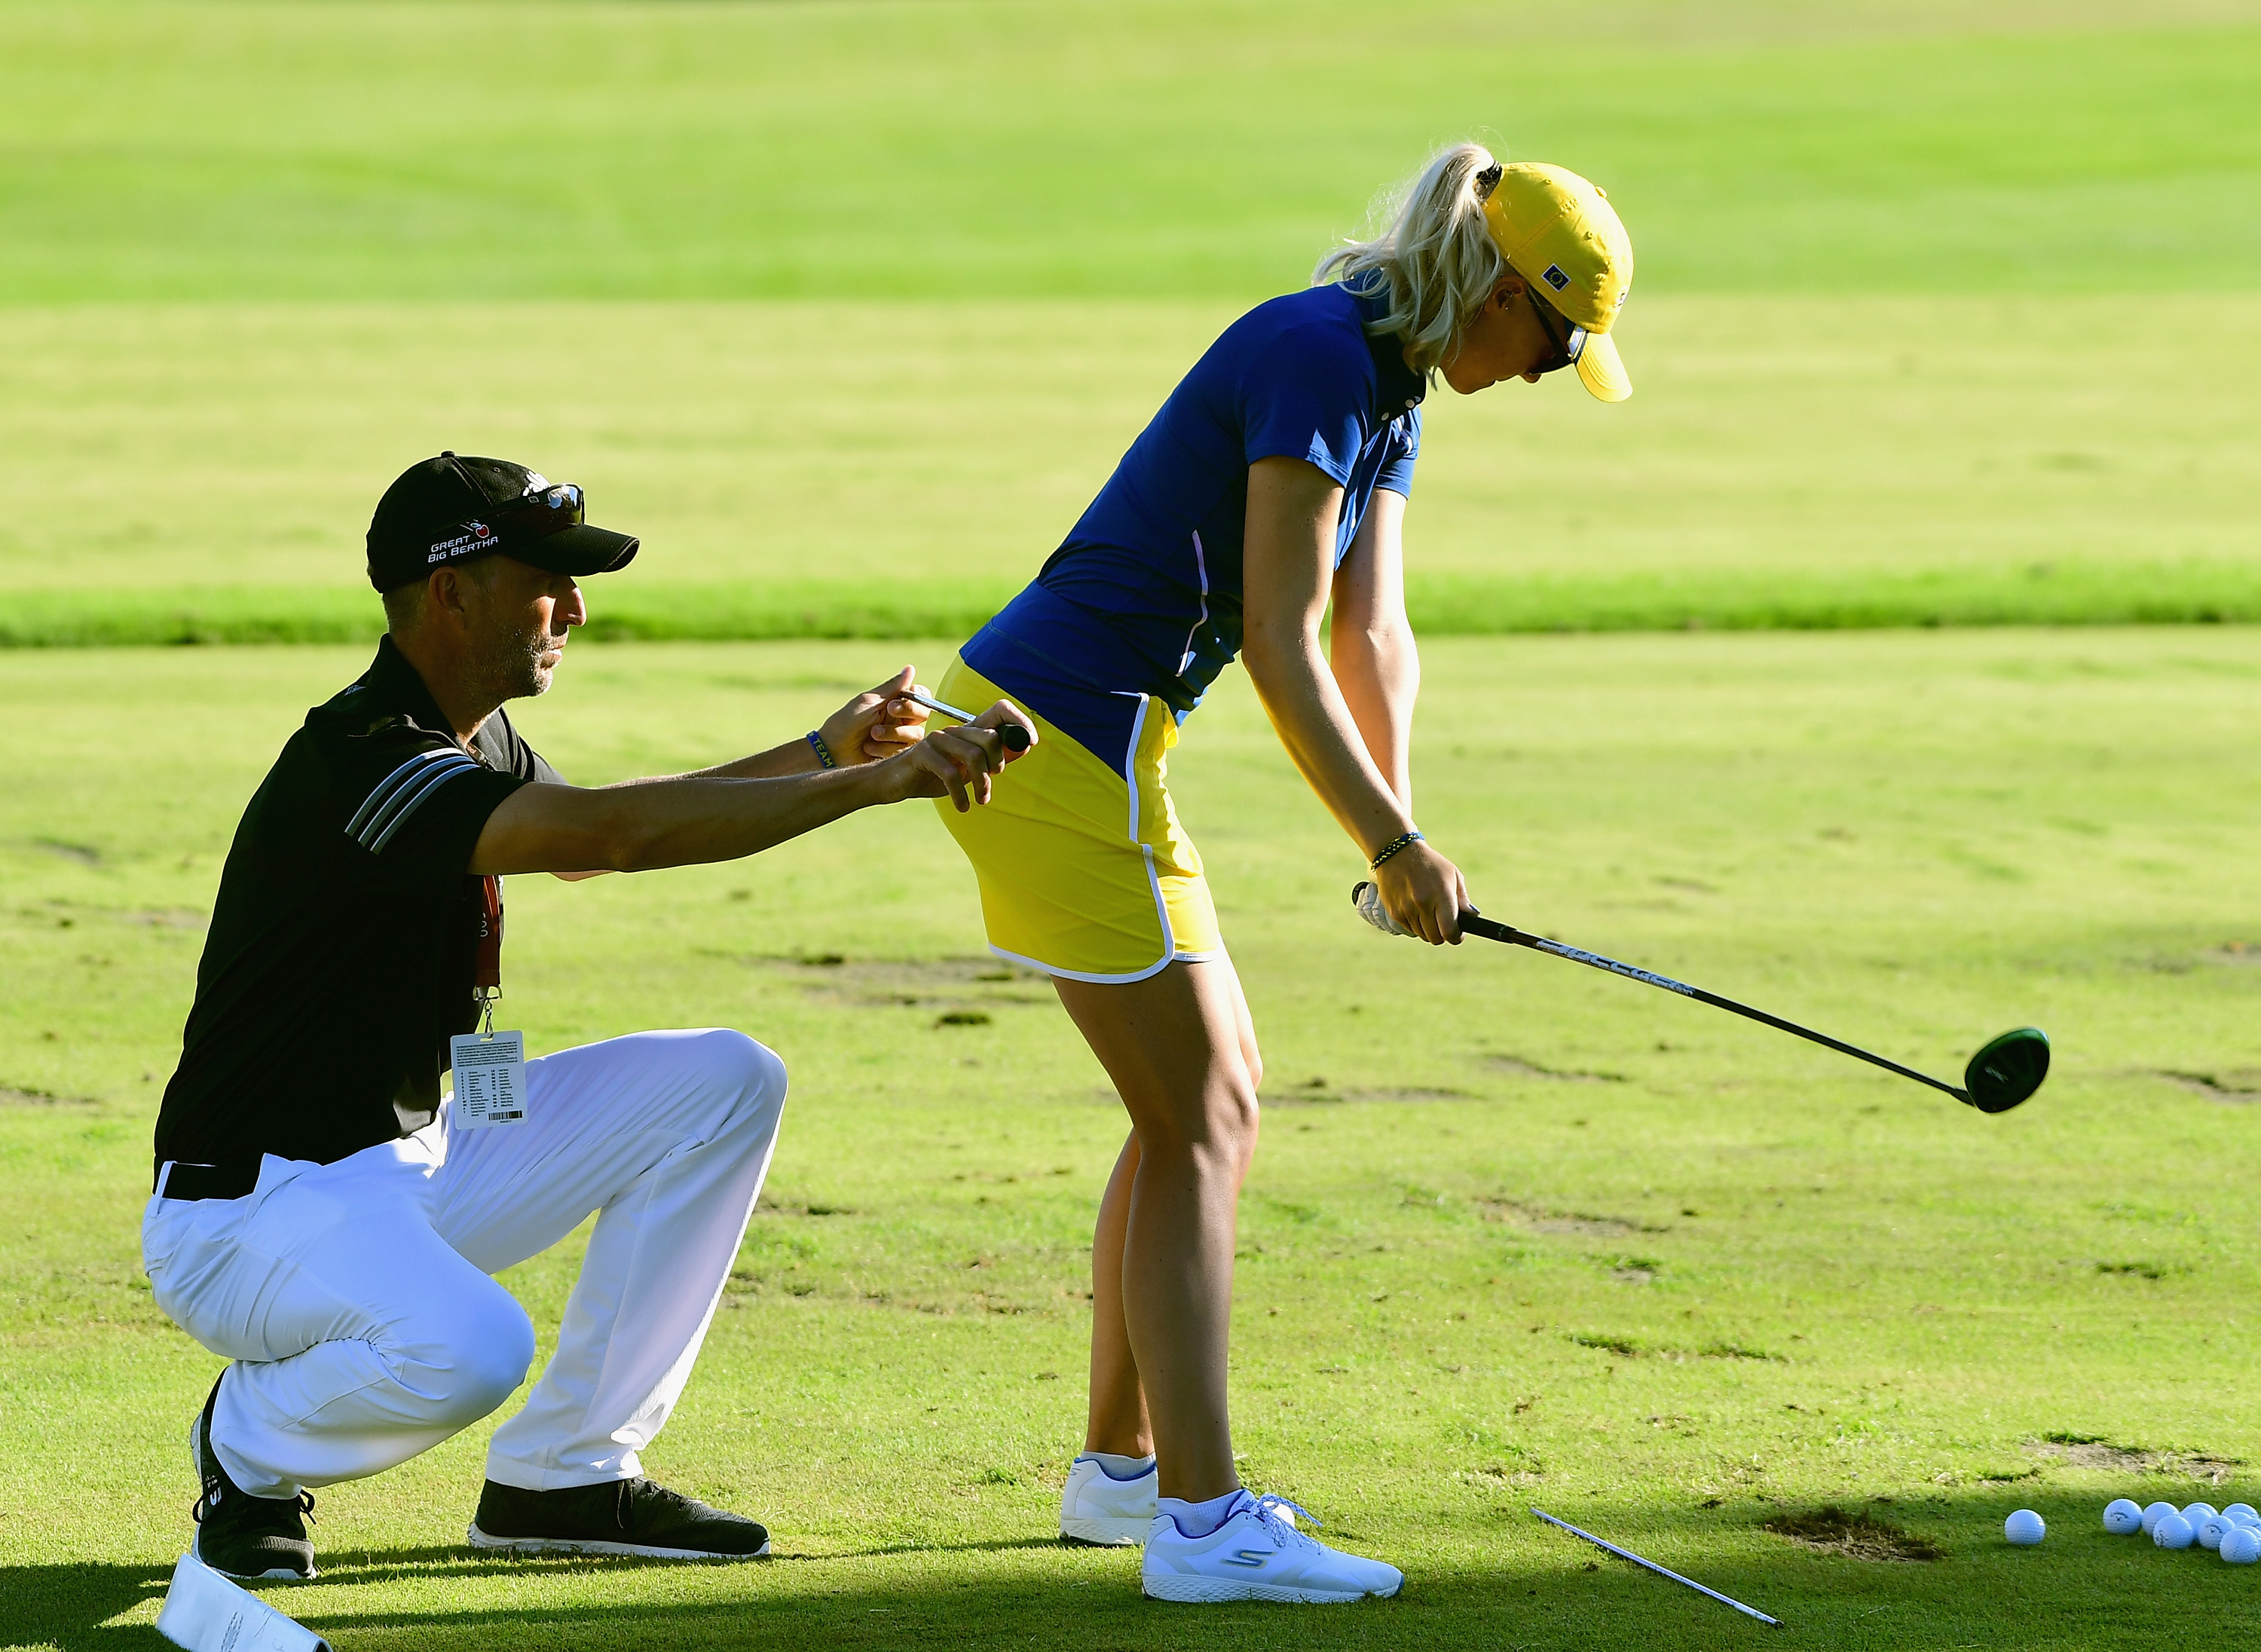 Has golf instruction got too complex in 2017? 